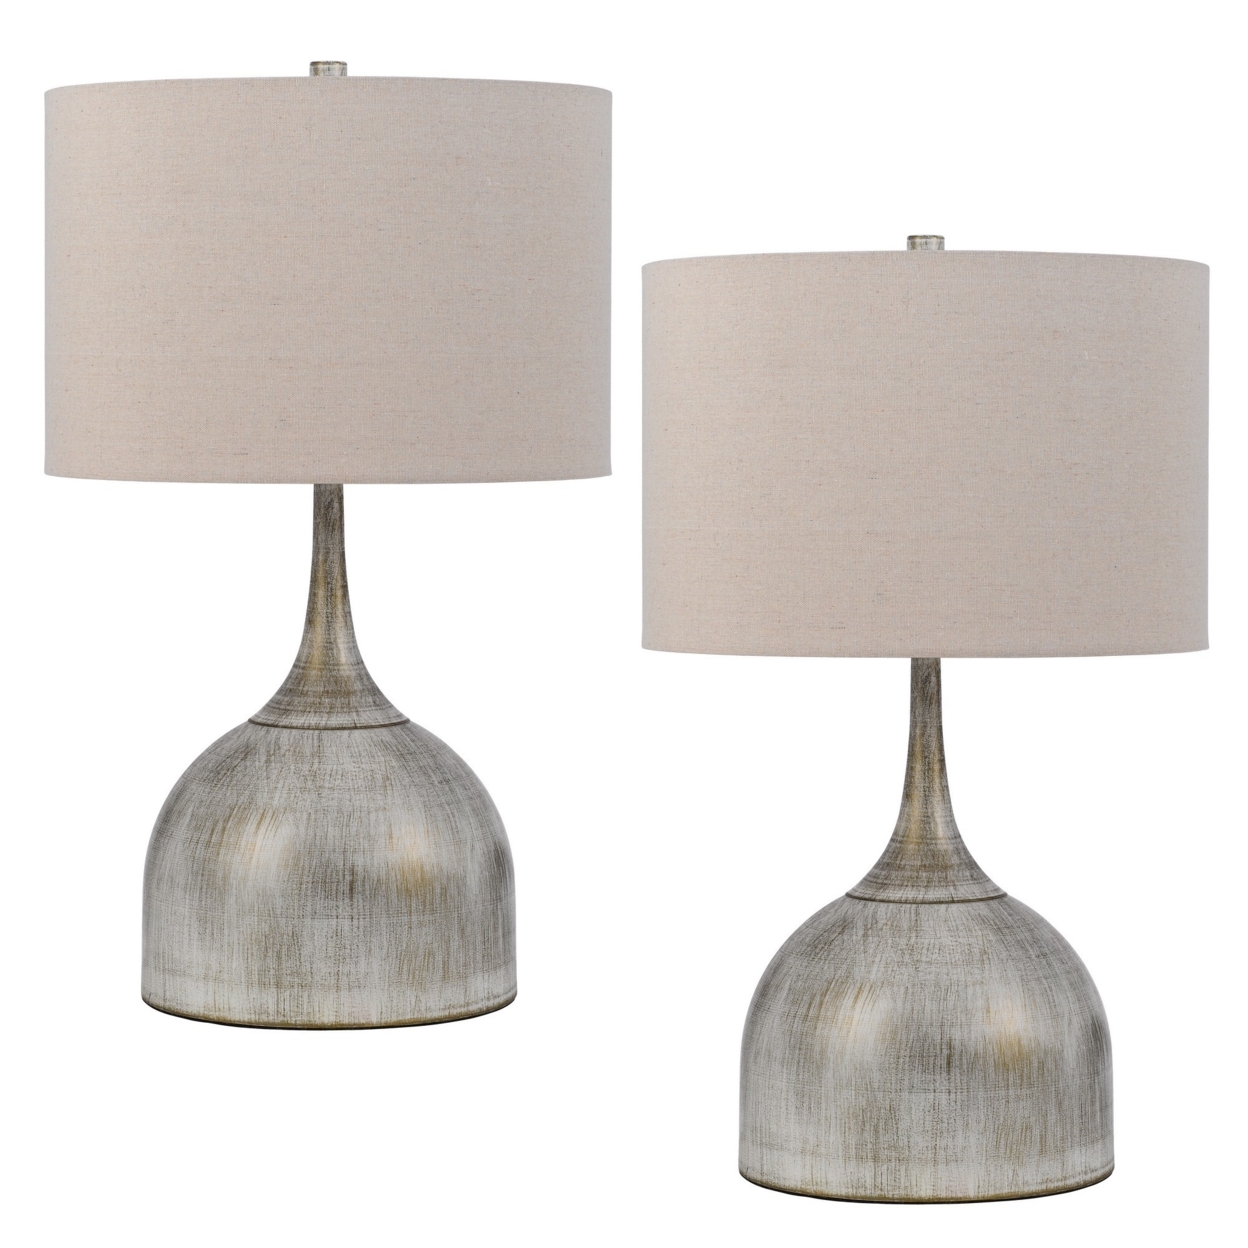 26 Inch Table Lamp, Set Of 2, Curved, Beige Fabric Shade, Distressed Gray- Saltoro Sherpi